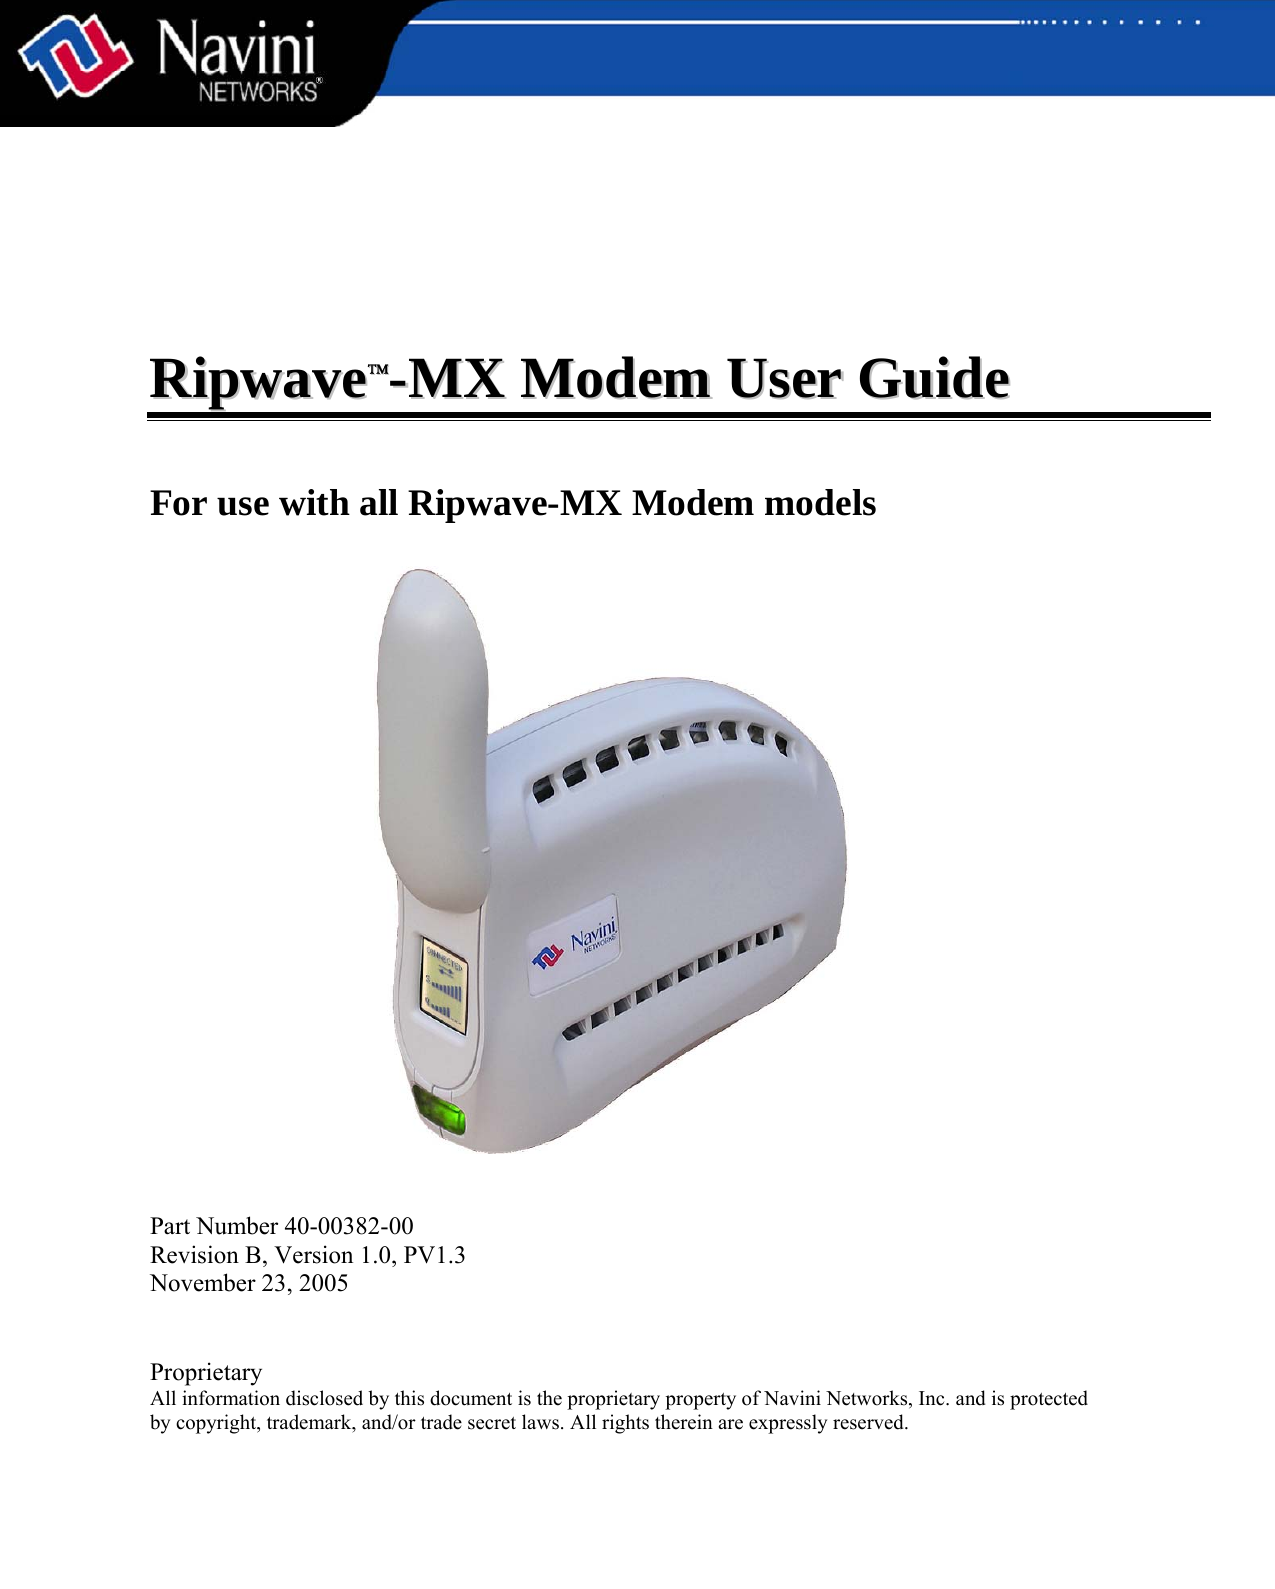          RRiippwwaavvee™™--MMXX  MMooddeemm  UUsseerr  GGuuiiddee    For use with all Ripwave-MX Modem models    Part Number 40-00382-00 Revision B, Version 1.0, PV1.3 November 23, 2005   Proprietary All information disclosed by this document is the proprietary property of Navini Networks, Inc. and is protected  by copyright, trademark, and/or trade secret laws. All rights therein are expressly reserved.  